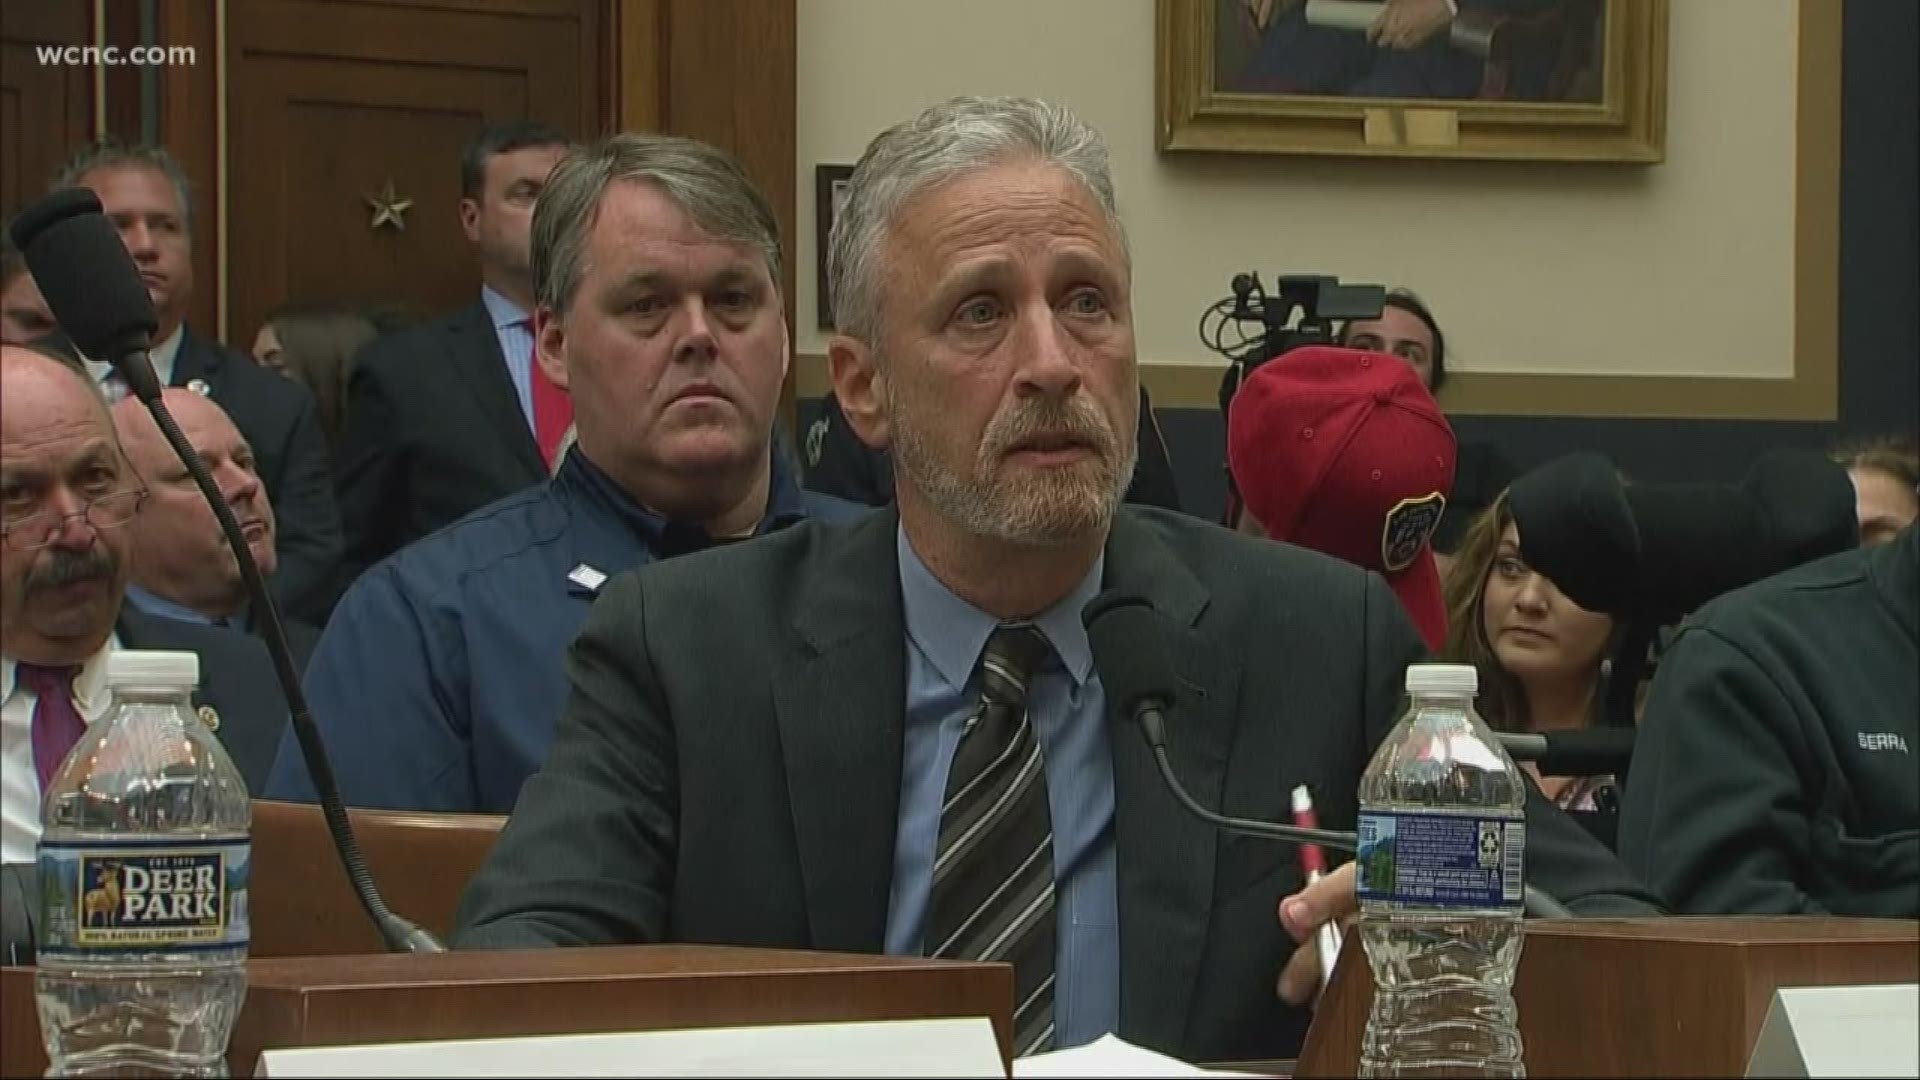 Comedian Jon Stewart slammed Congress Tuesday for not supporting 9/11 first responders. Stewart pleaded for lawmakers to re-authorities the victims' compensation fund to help those who saved countless lives during the deadliest attack in U.S. history.